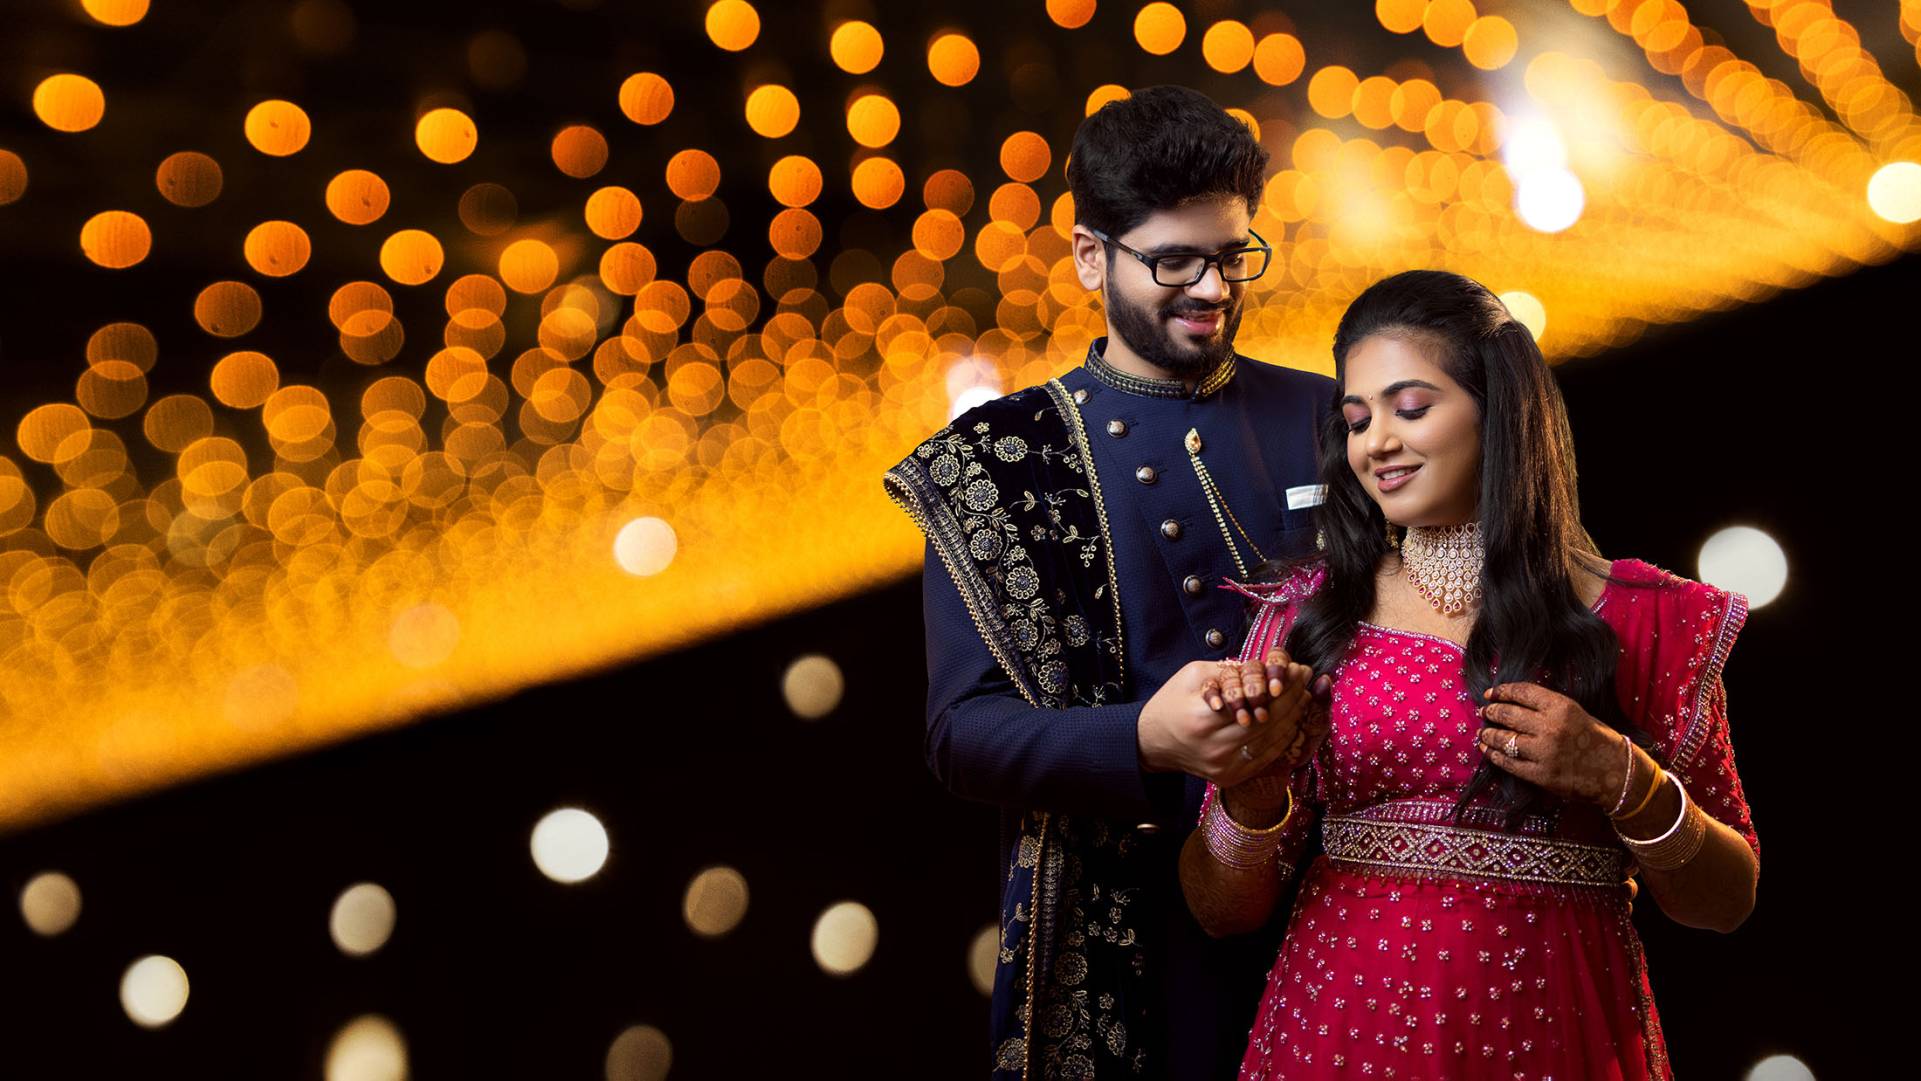 Hindu wedding photography pricing package